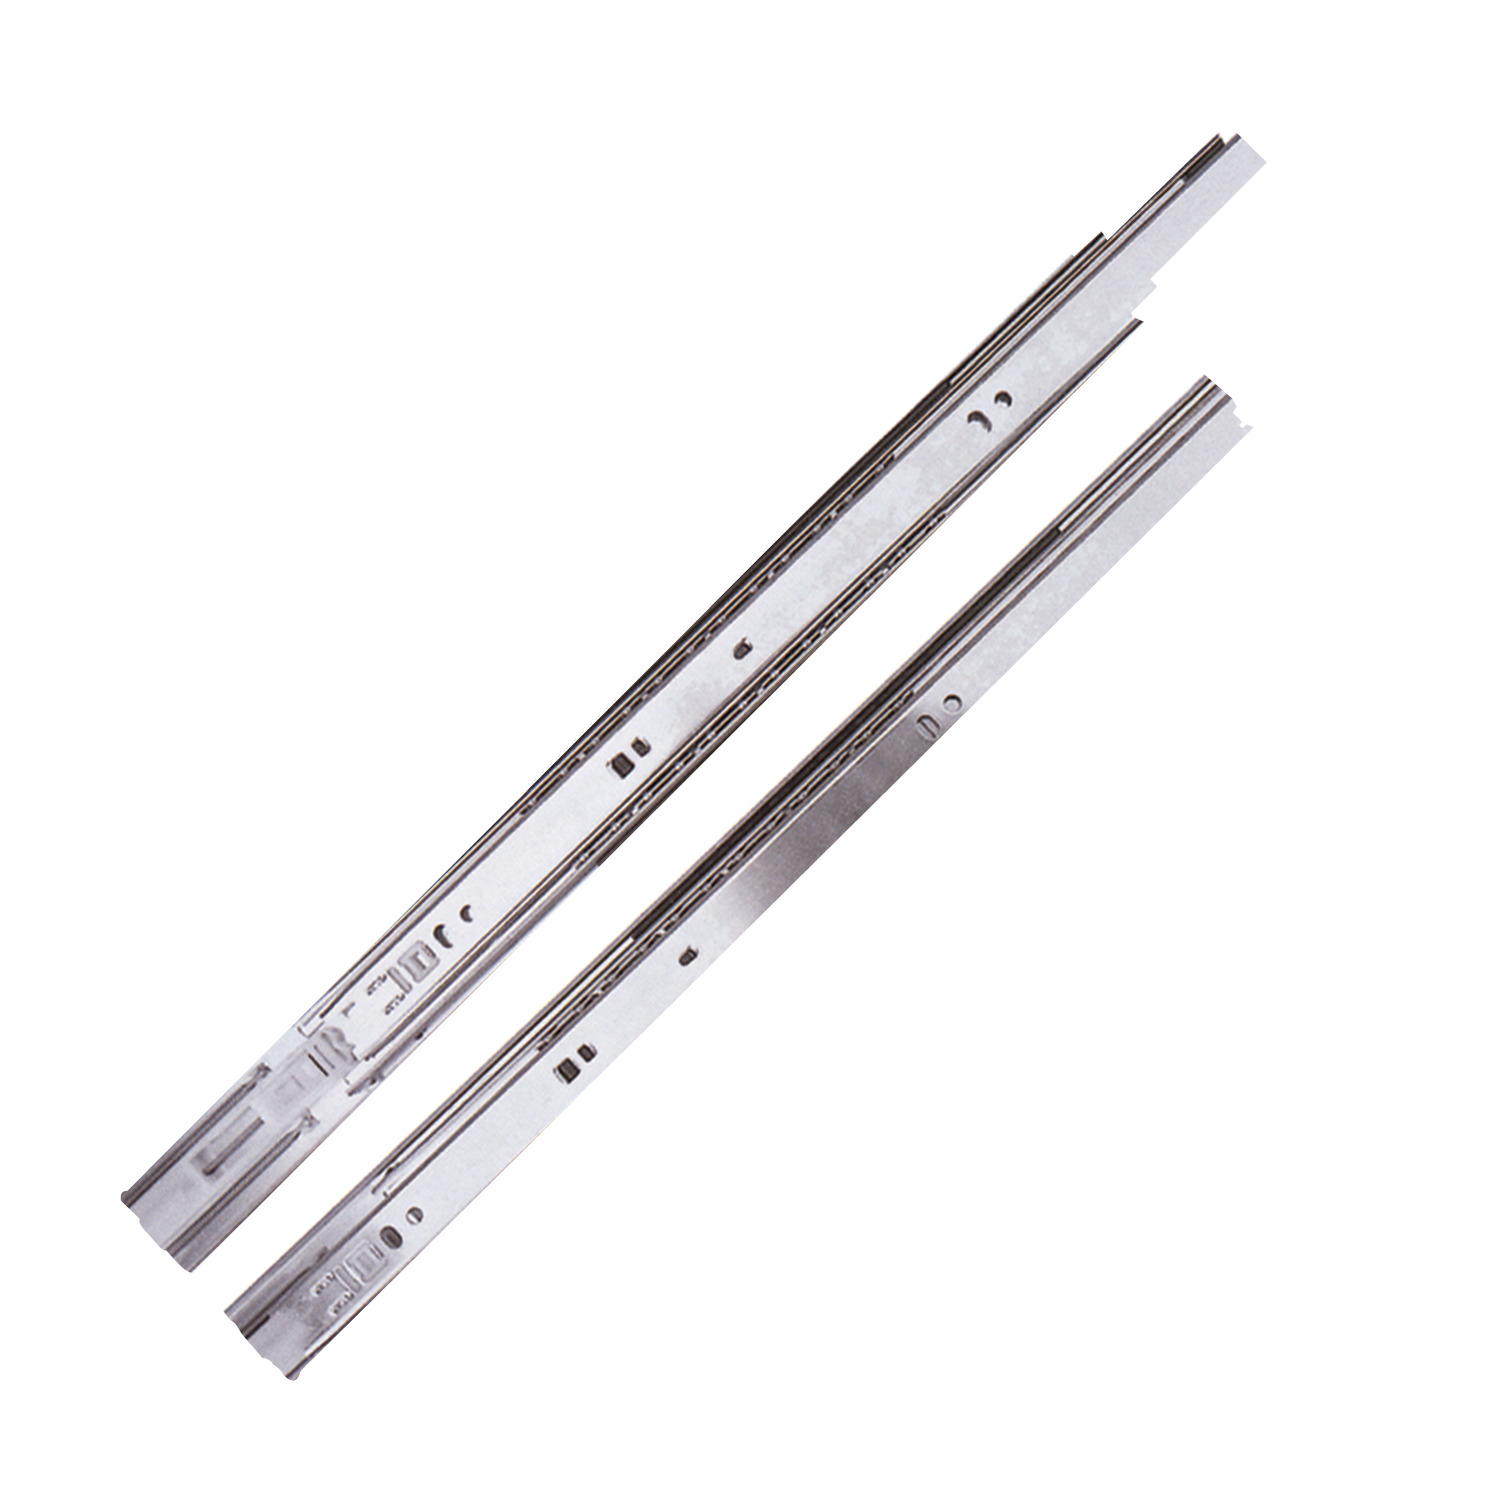 Product P4080, Drawer Slide - Full Extension lever disconnect - soft-closing - 30 Kg load per pair / 